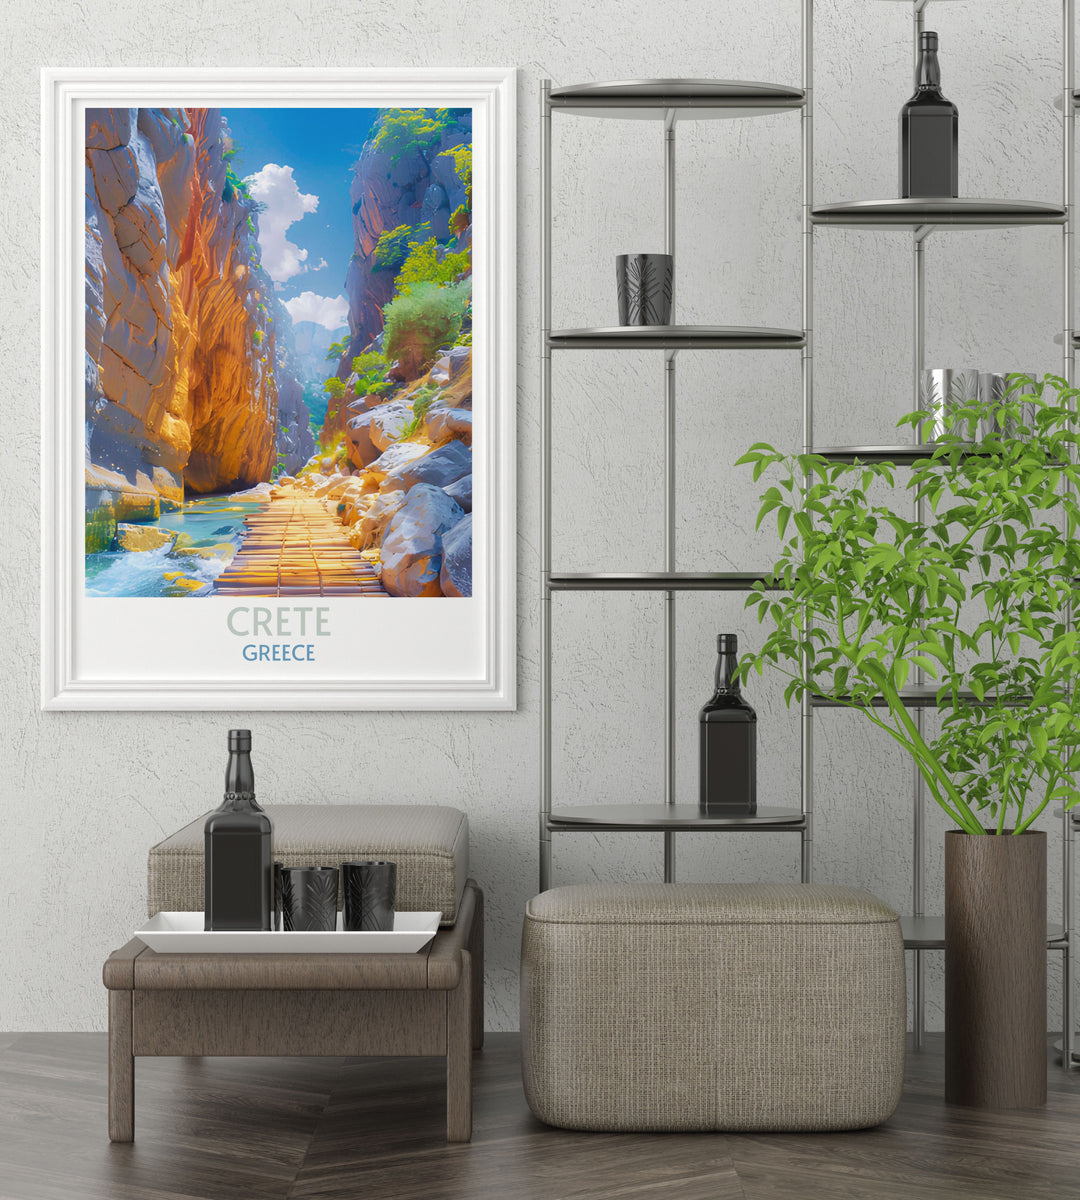 Canvas art of Samaria Gorge capturing the dramatic contrasts of light and shadow in the deep crevices of Cretes popular hiking destination.